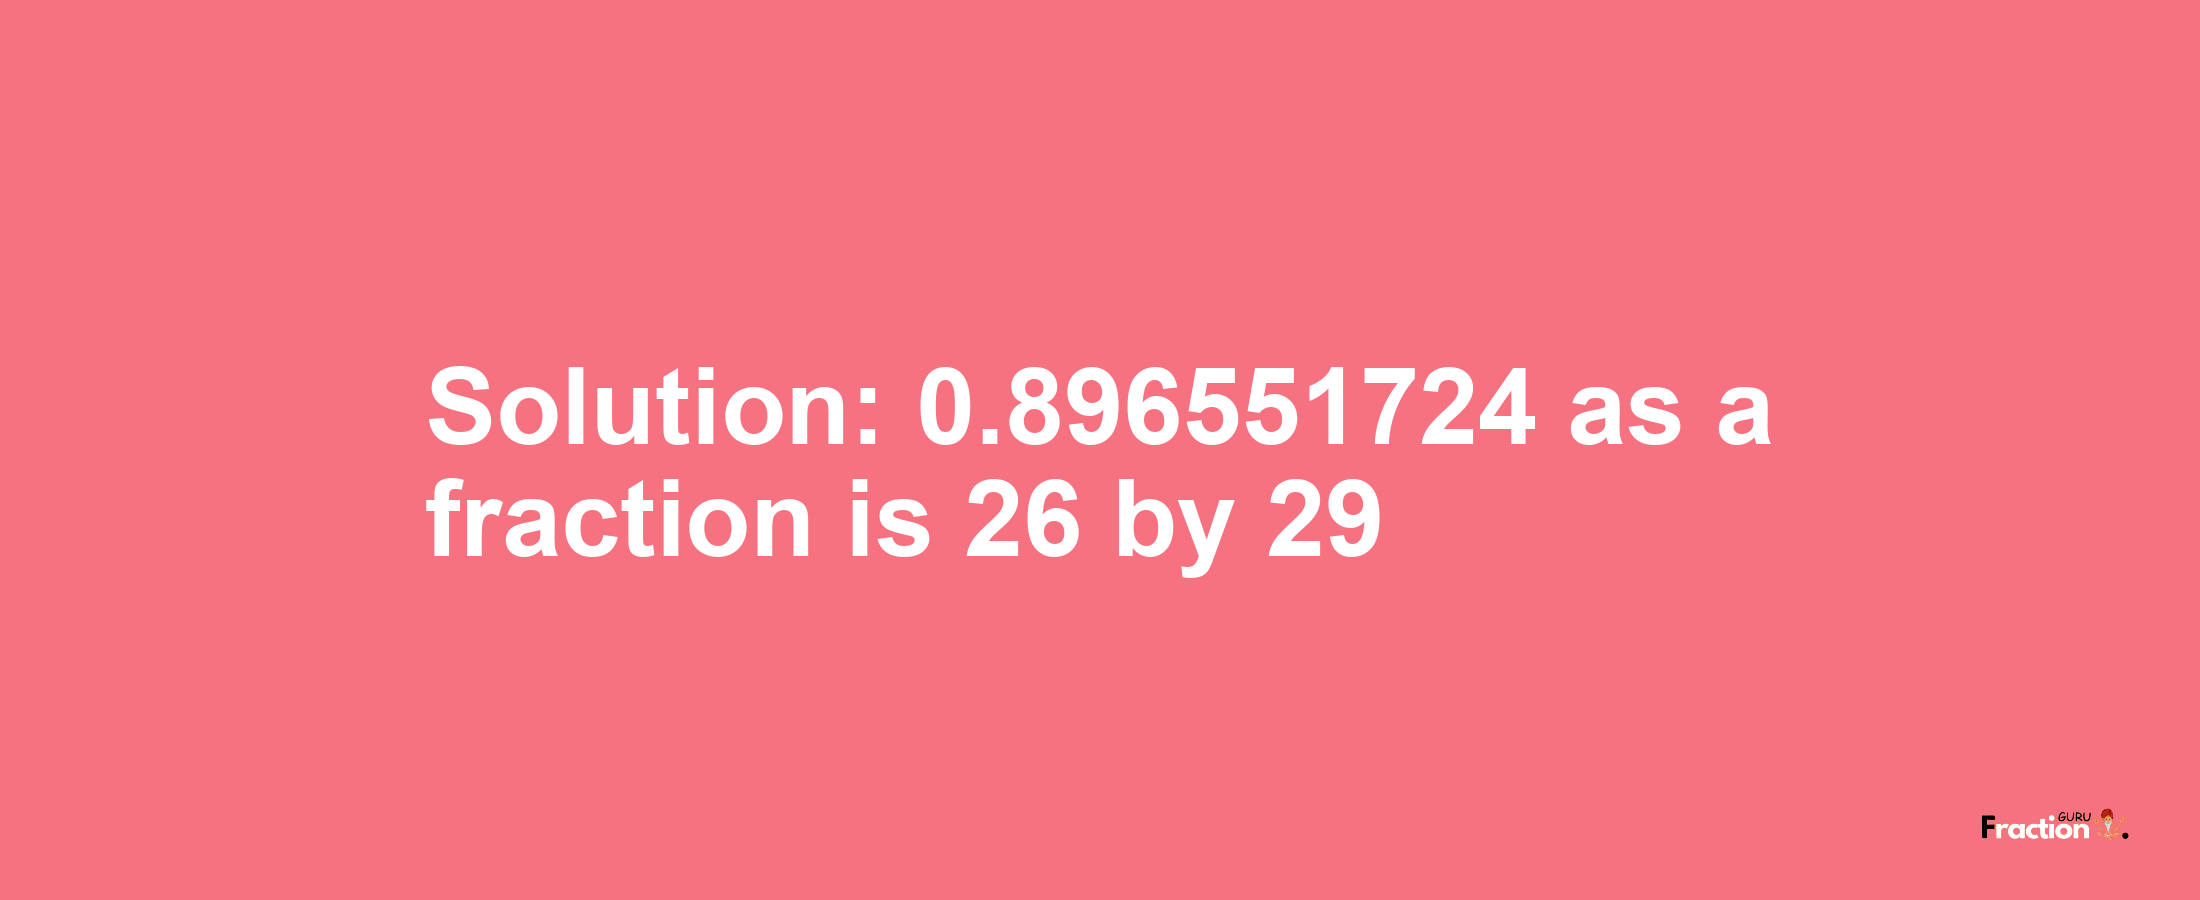 Solution:0.896551724 as a fraction is 26/29